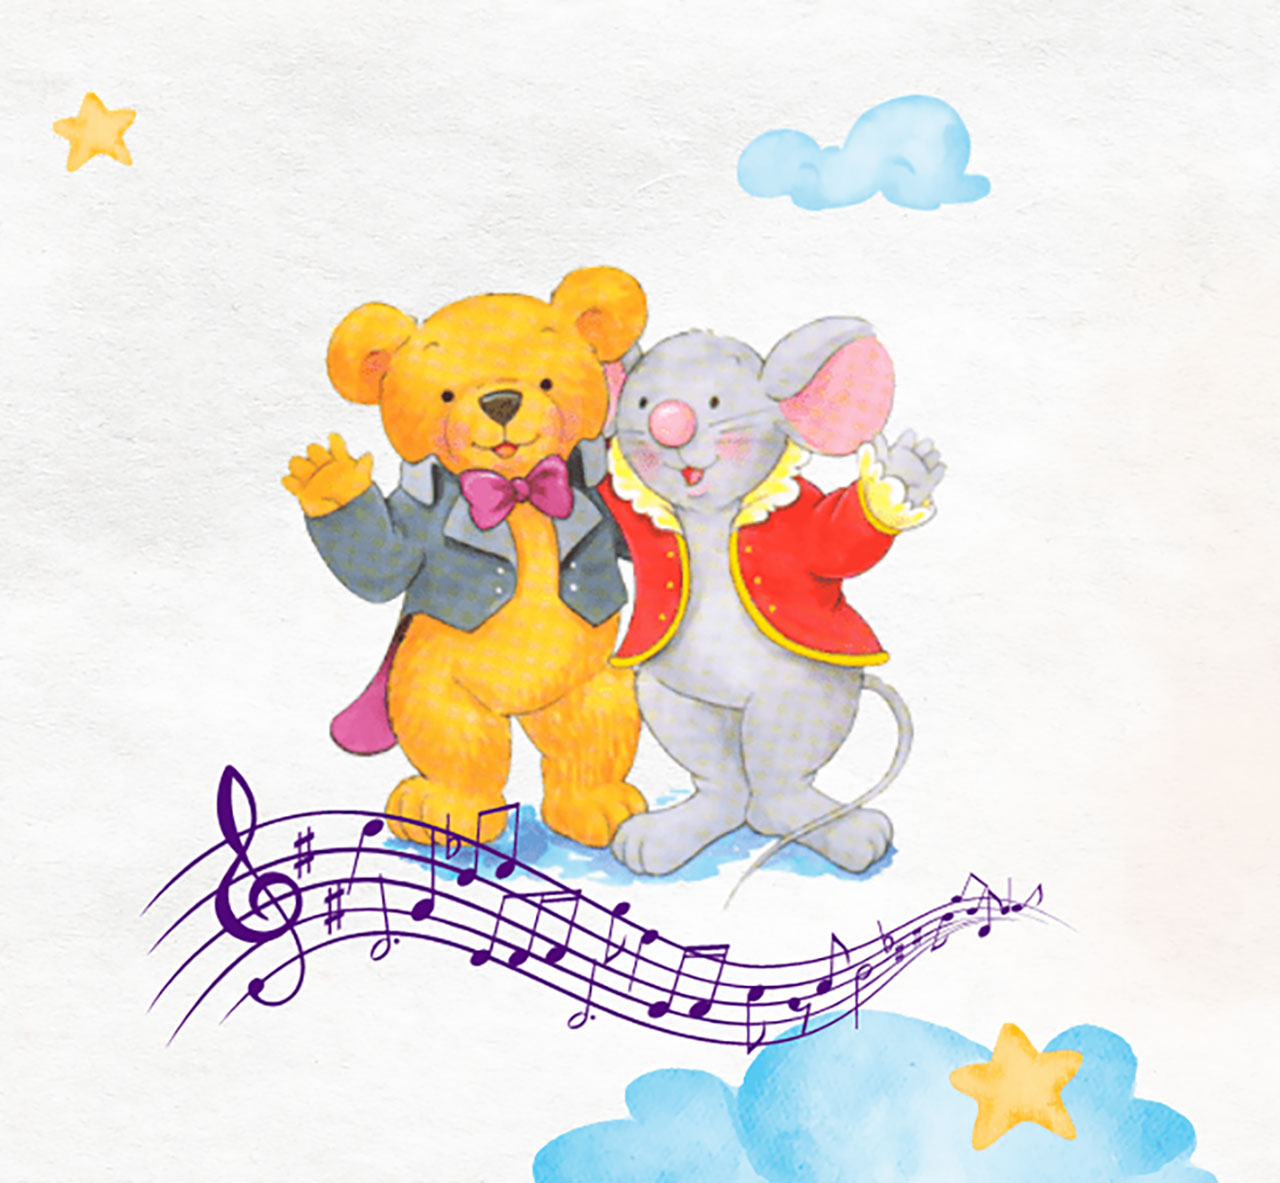 Bear and a mouse floating on musical notes.